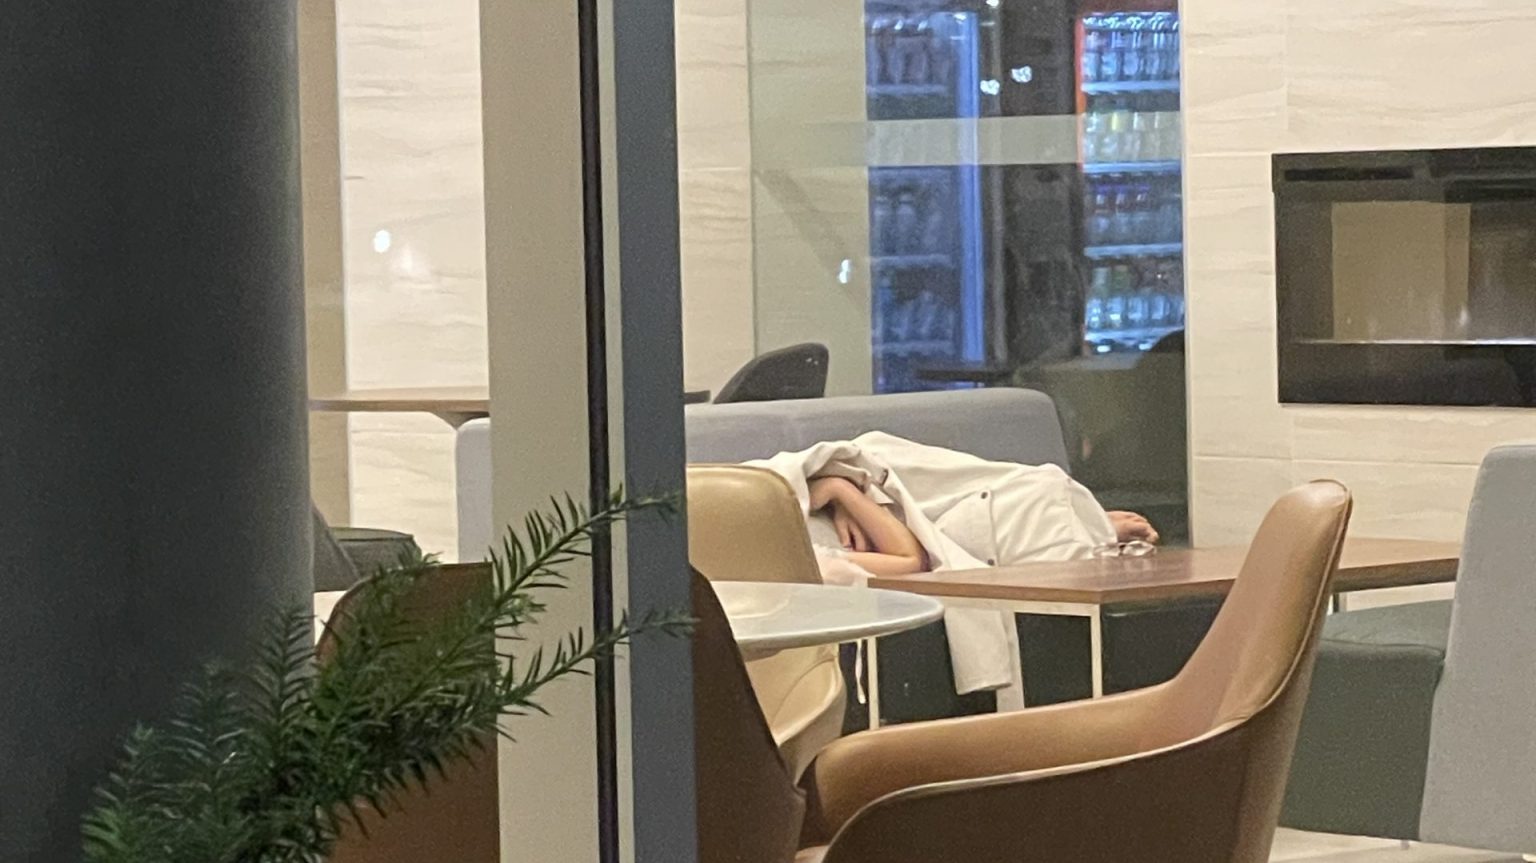 Person sleeping in lobby.